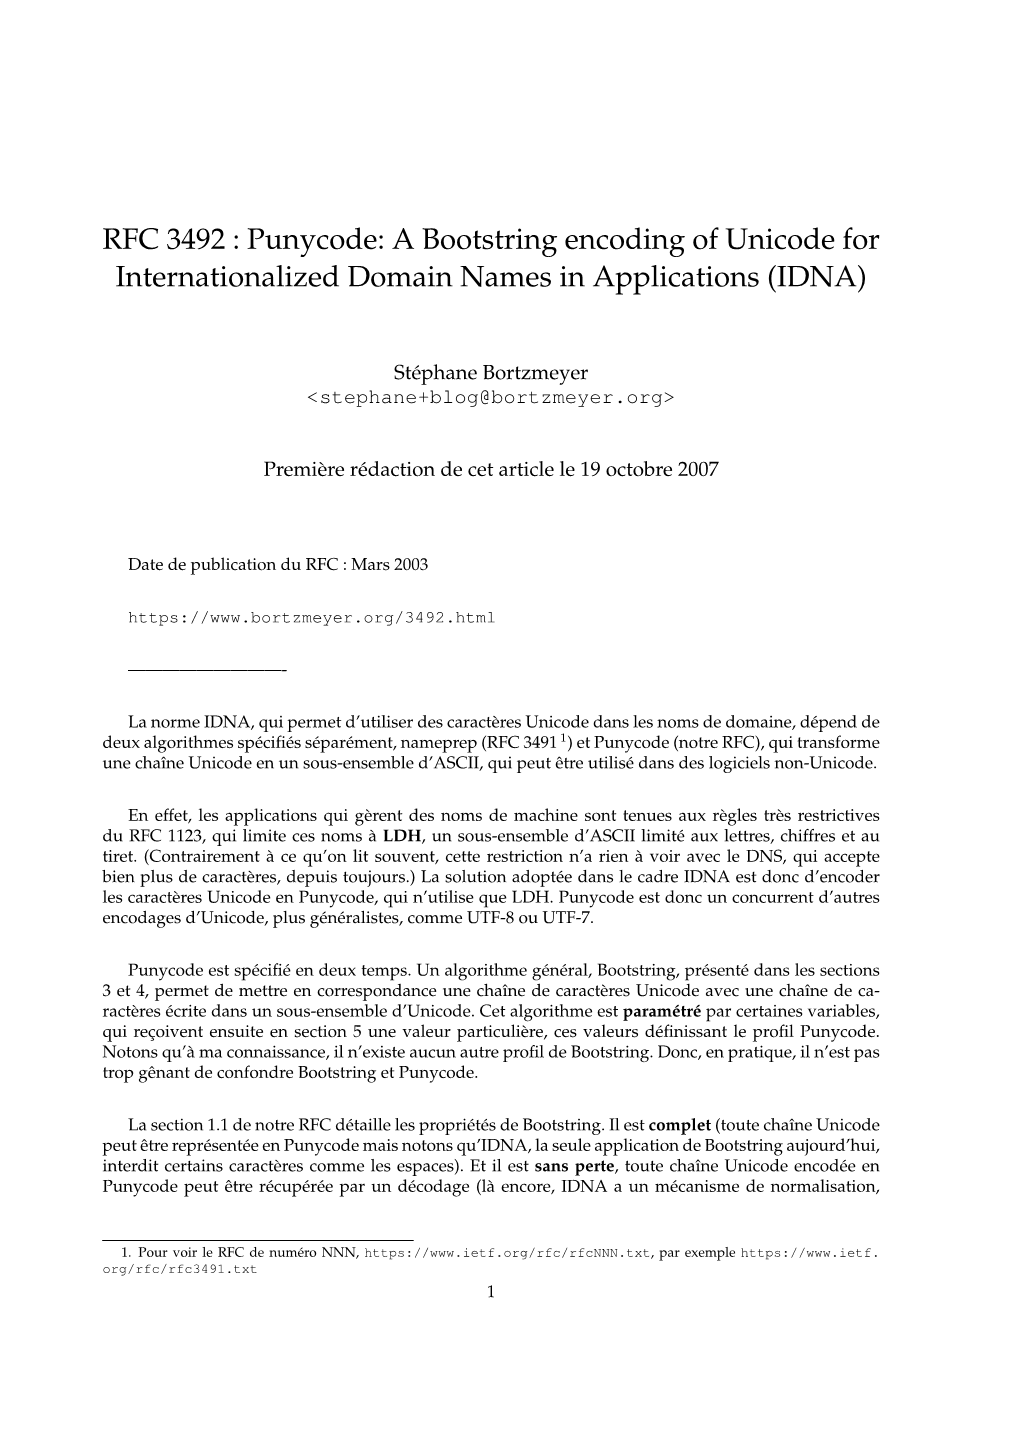 RFC 3492 : Punycode: a Bootstring Encoding of Unicode for Internationalized Domain Names in Applications (IDNA)